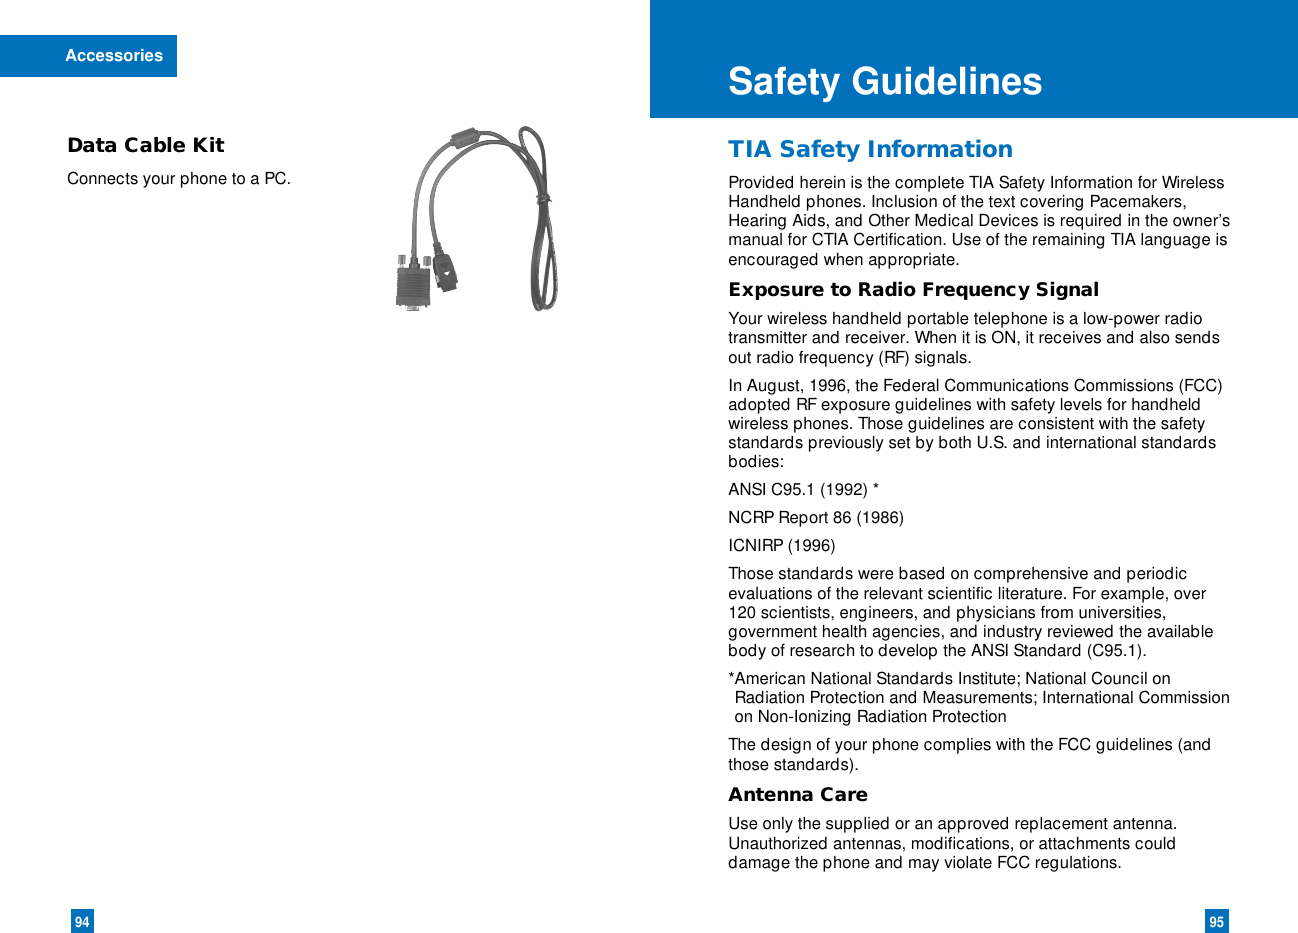 9594Data Cable KitConnects your phone to a PC.Accessories Safety GuidelinesTIA Safety InformationProvided herein is the complete TIA Safety Information for WirelessHandheld phones. Inclusion of the text covering Pacemakers,Hearing Aids, and Other Medical Devices is required in the owner’smanual for CTIA Certification. Use of the remaining TIA language isencouraged when appropriate.Exposure to Radio Frequency SignalYour wireless handheld portable telephone is a low-power radiotransmitter and receiver. When it is ON, it receives and also sendsout radio frequency (RF) signals.In August, 1996, the Federal Communications Commissions (FCC)adopted RF exposure guidelines with safety levels for handheldwireless phones. Those guidelines are consistent with the safetystandards previously set by both U.S. and international standardsbodies:ANSI C95.1 (1992) *NCRP Report 86 (1986)ICNIRP (1996)Those standards were based on comprehensive and periodicevaluations of the relevant scientific literature. For example, over120 scientists, engineers, and physicians from universities,government health agencies, and industry reviewed the availablebody of research to develop the ANSI Standard (C95.1).*American National Standards Institute; National Council onRadiation Protection and Measurements; International Commissionon Non-Ionizing Radiation ProtectionThe design of your phone complies with the FCC guidelines (andthose standards).Antenna CareUse only the supplied or an approved replacement antenna.Unauthorized antennas, modifications, or attachments coulddamage the phone and may violate FCC regulations.